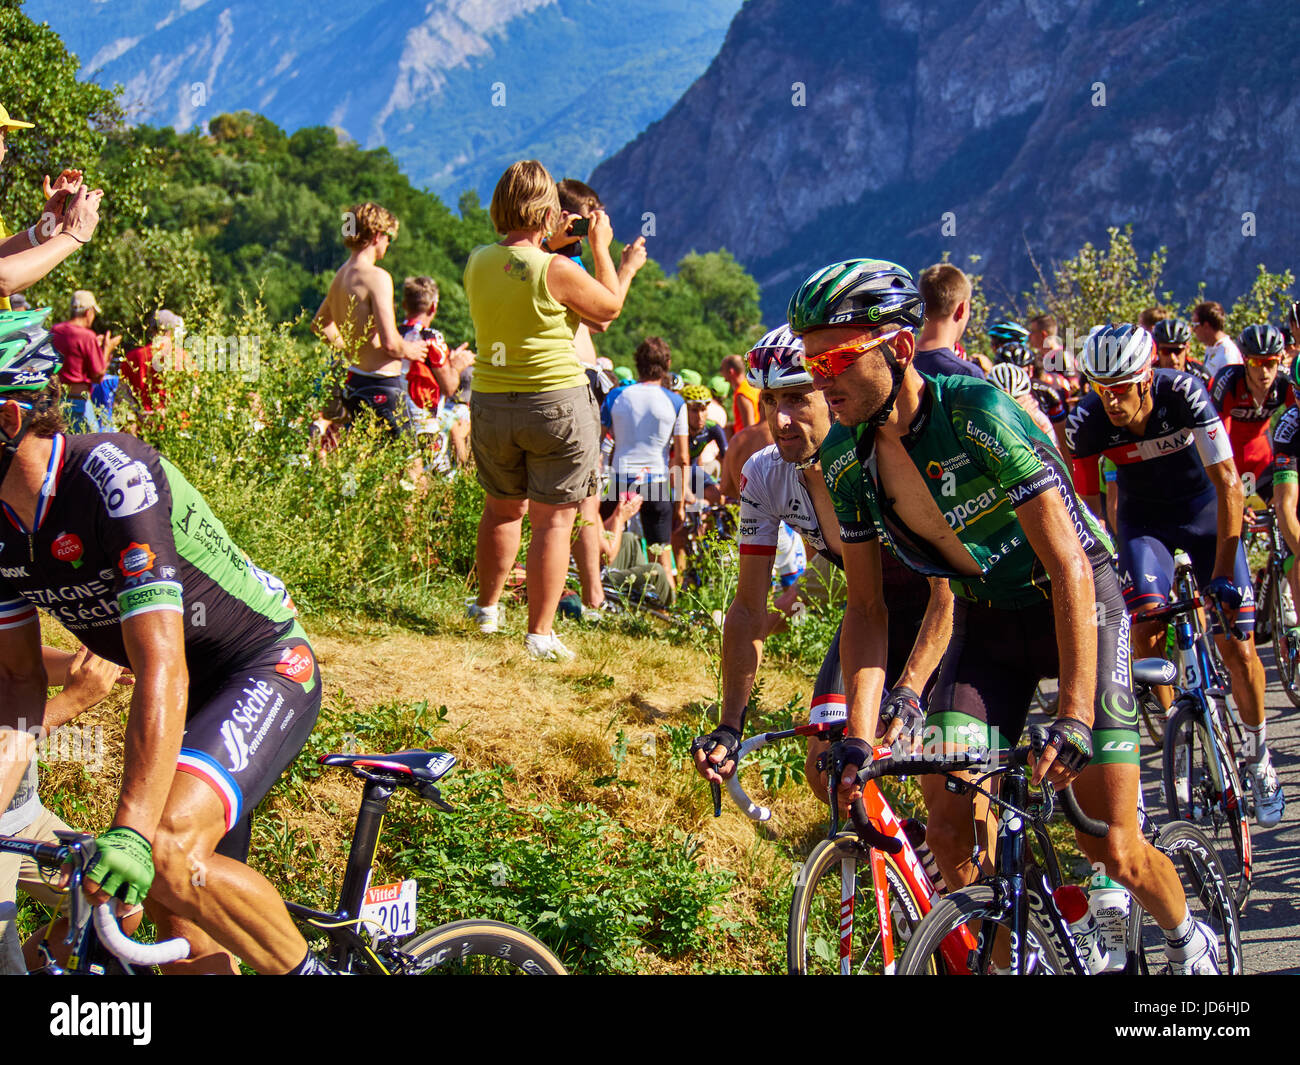 MONTVERNIER, FRANCE - JULY 23 2015: Riders in a hairpin turn on stage 18 in Tour de France 2015 Stock Photo